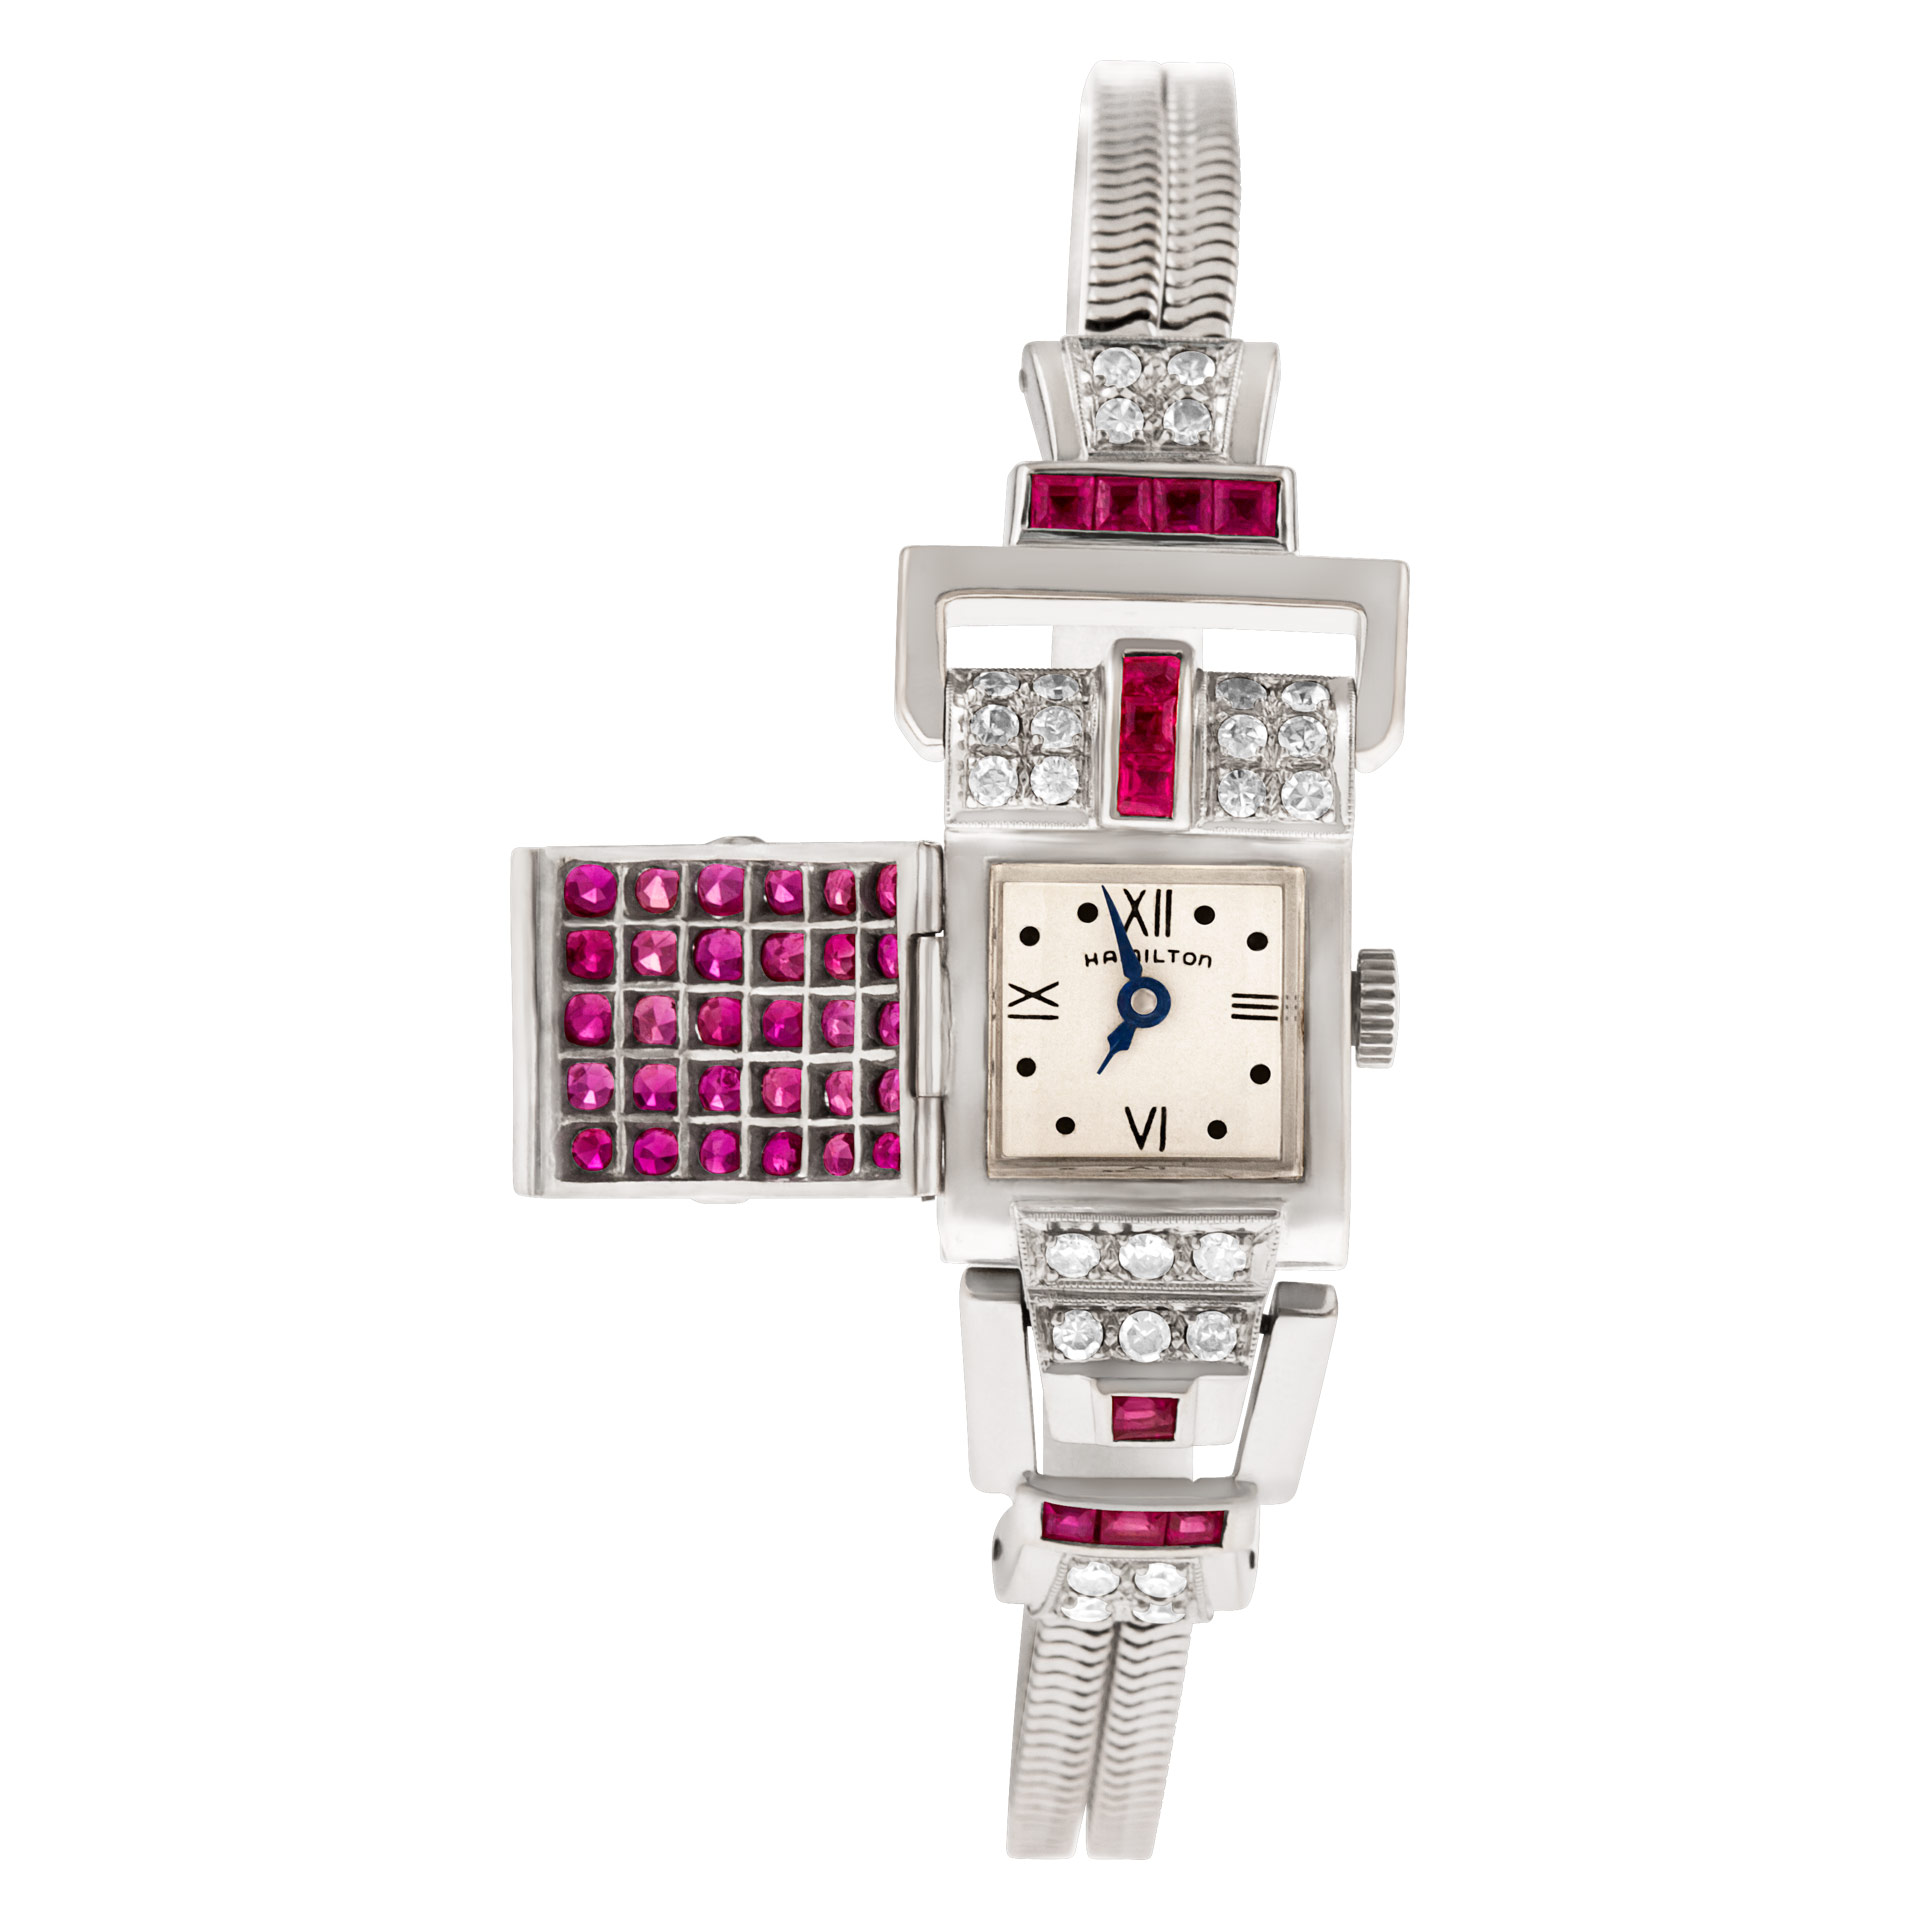 Hamilton diamond and ruby cocktail watch in 14k gold